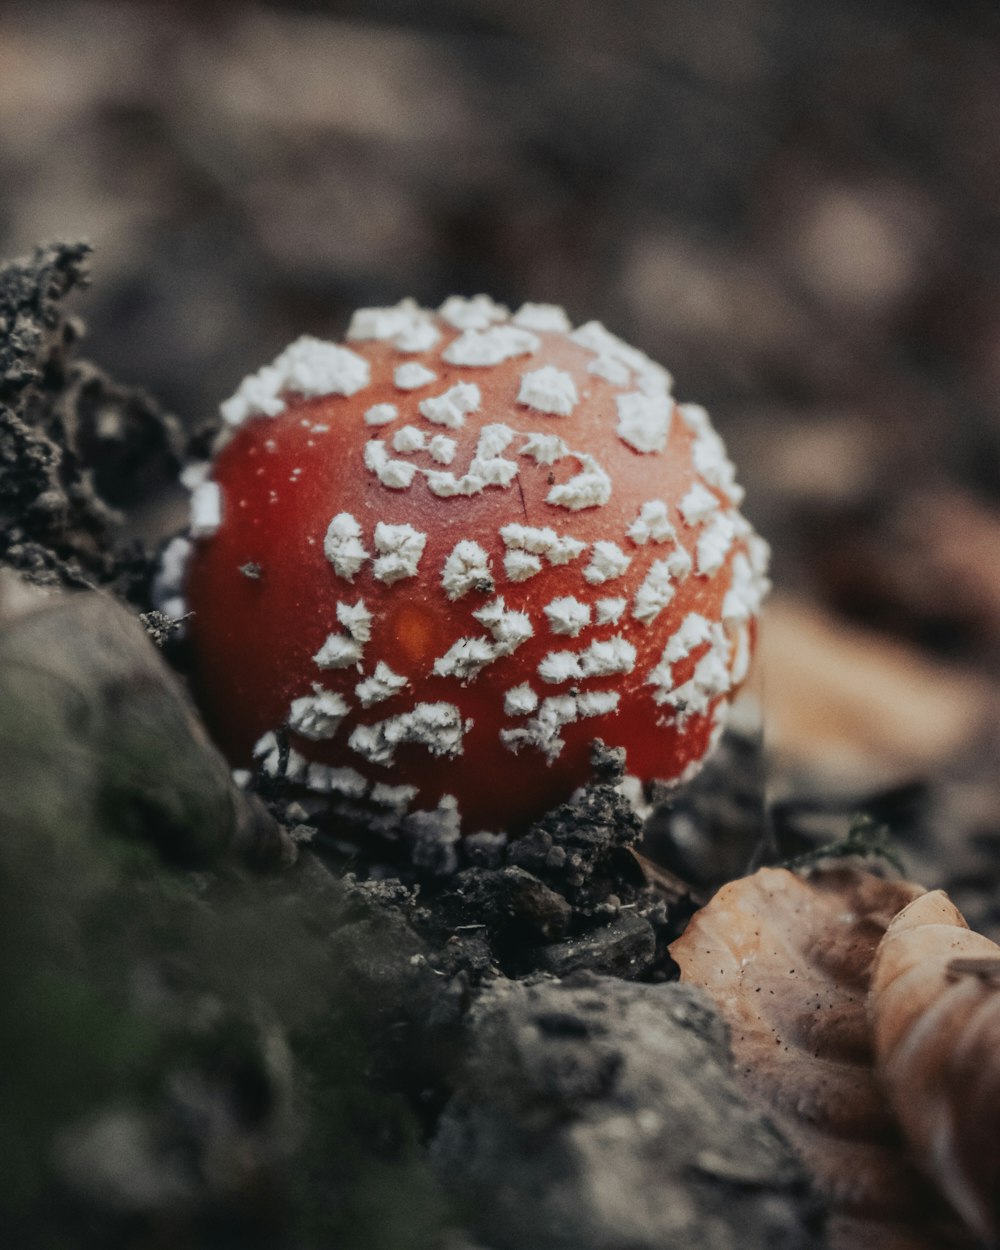 red and white mushroom in close up photography